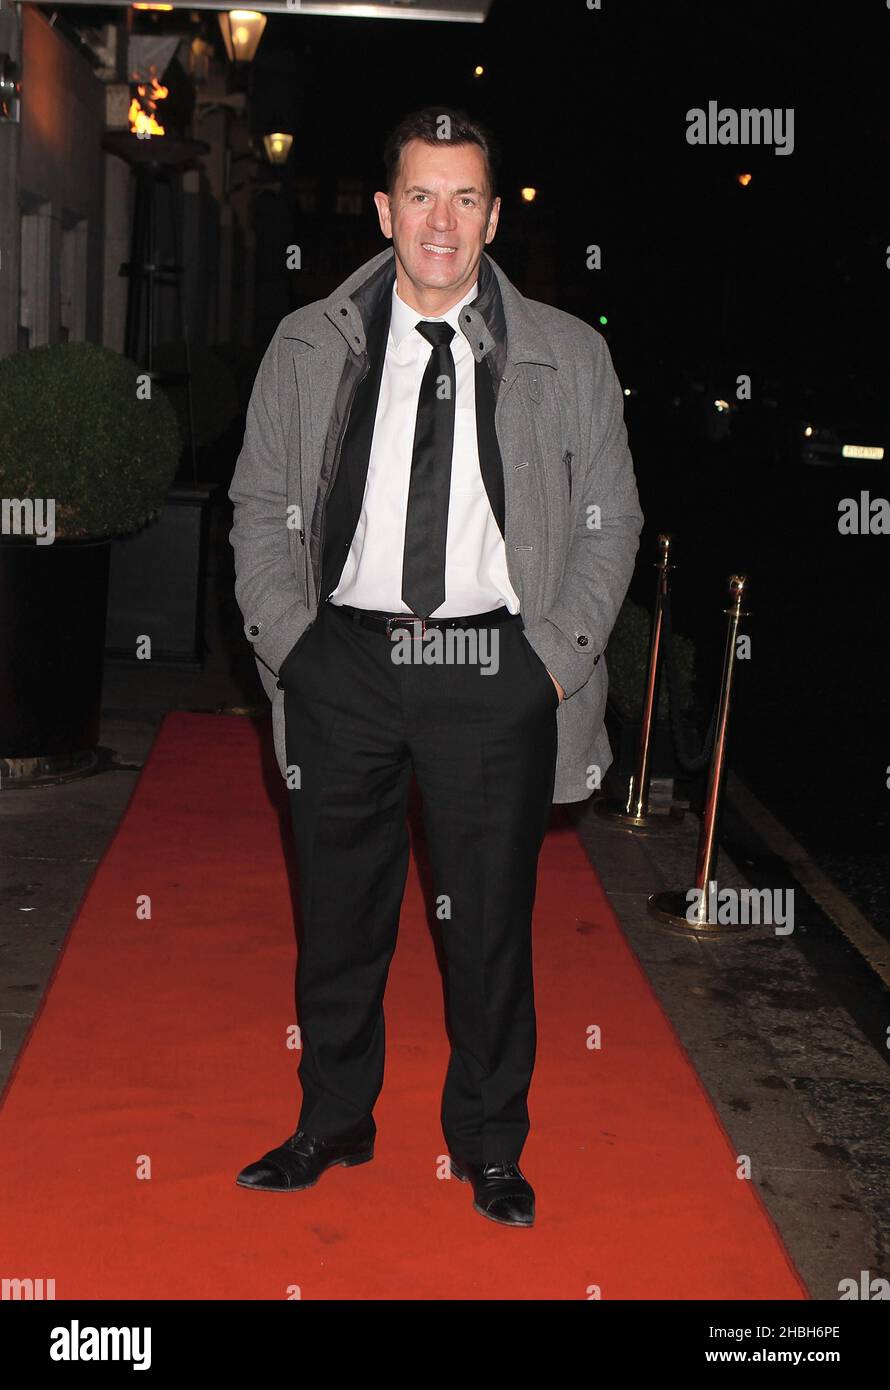 Duncan Bannatyne attends the Helping Hands VIP fundraising dinner at the Savoy Hotel in London. Stock Photo